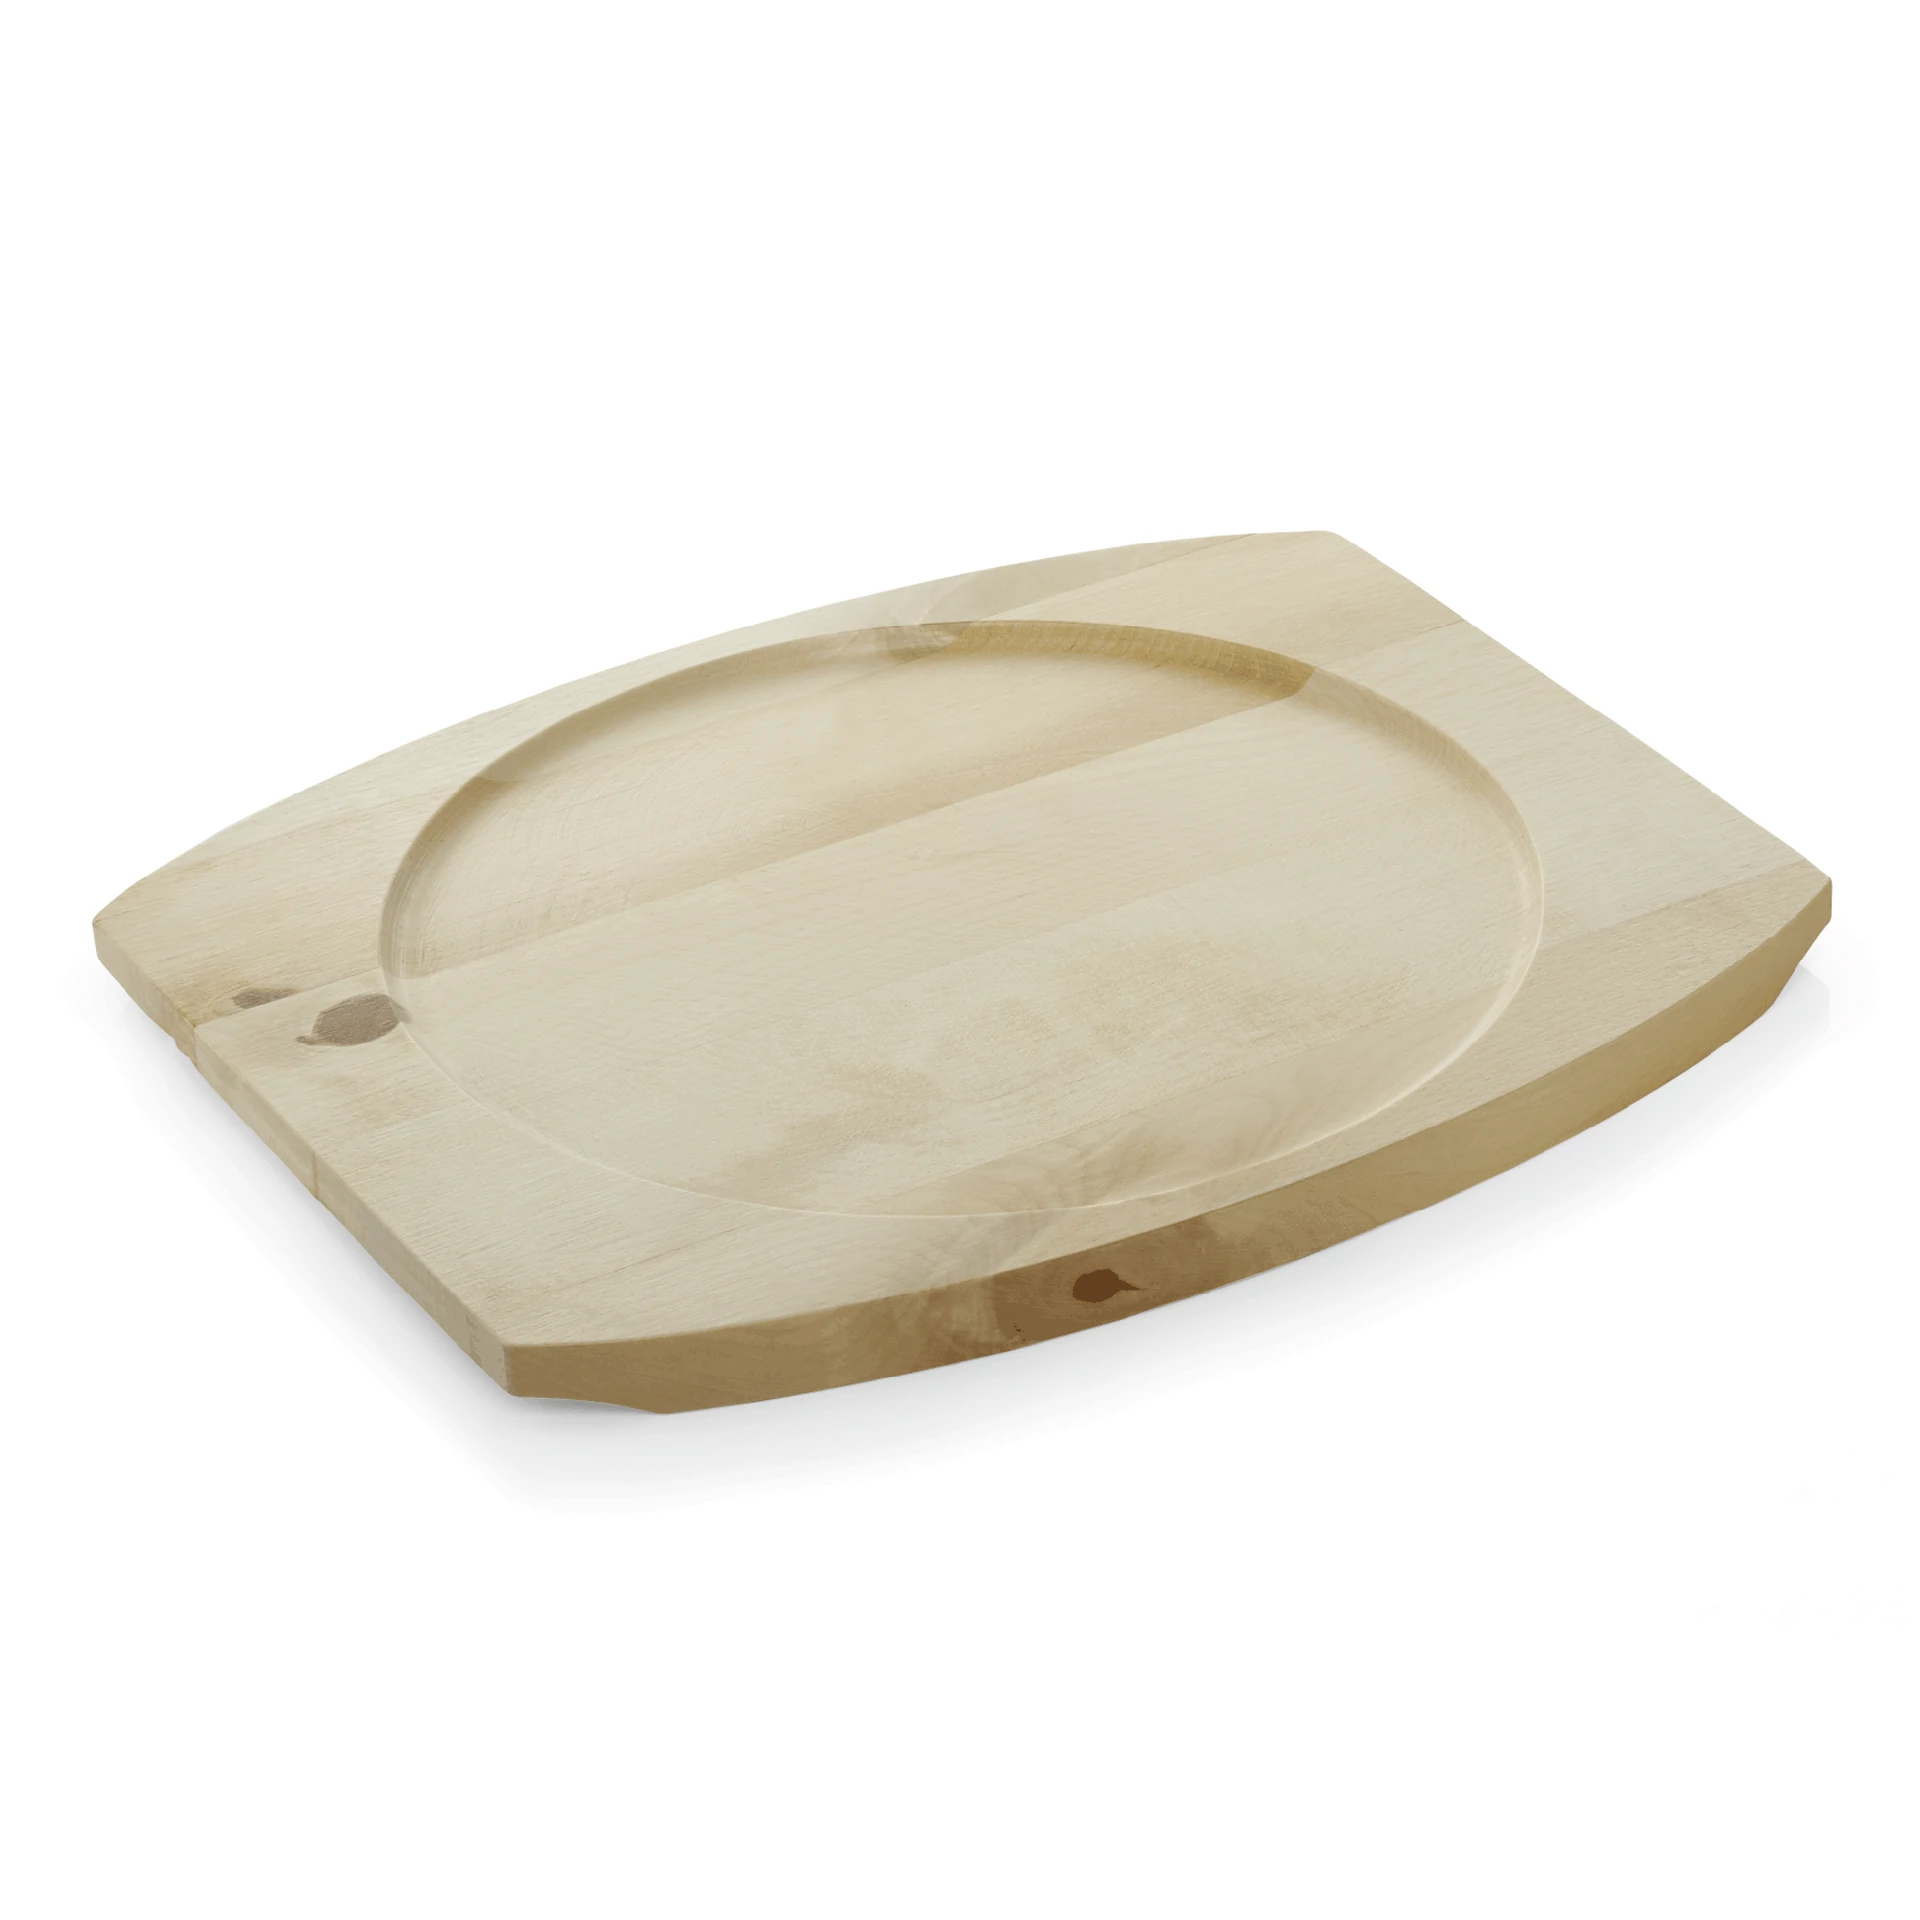 Replacement wooden tray